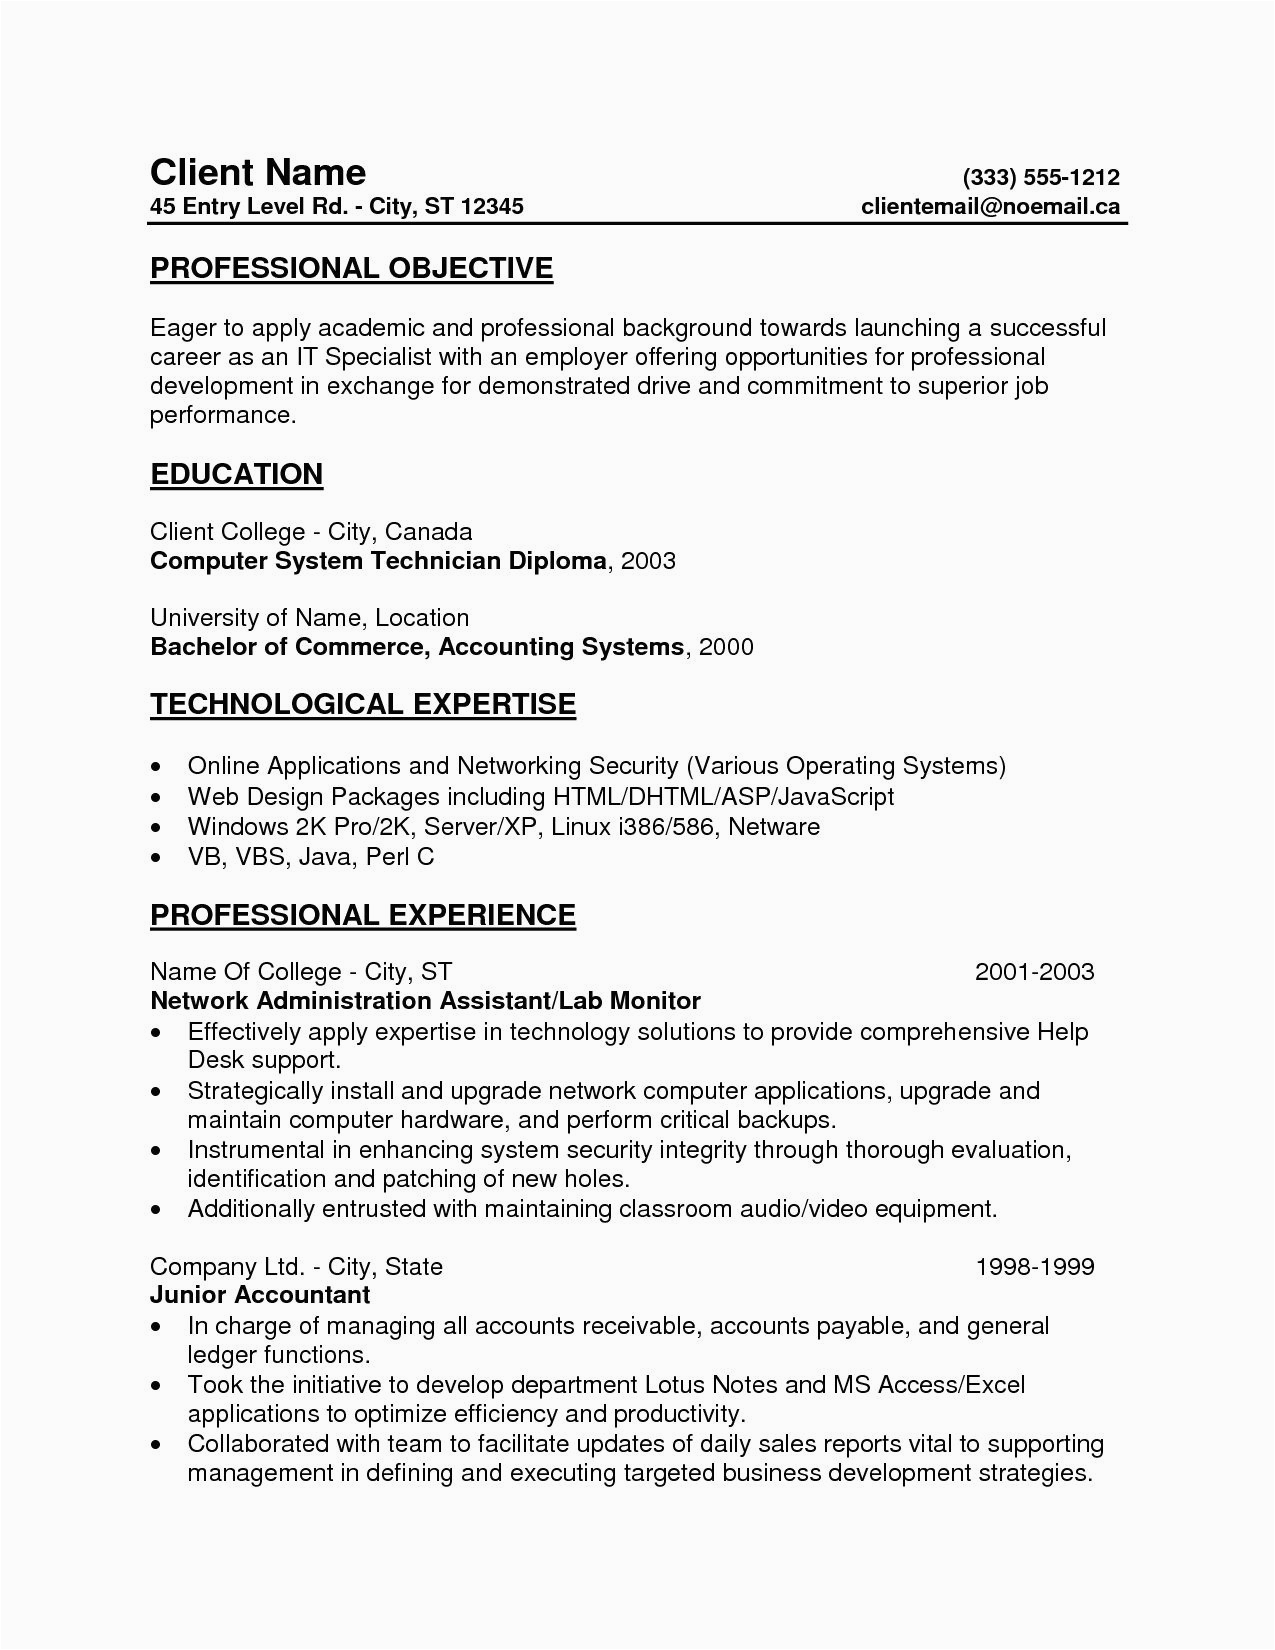 Sample Resume Objective Statements Entry Level Data Entry Resume Objective Luxury Entry Level Resume